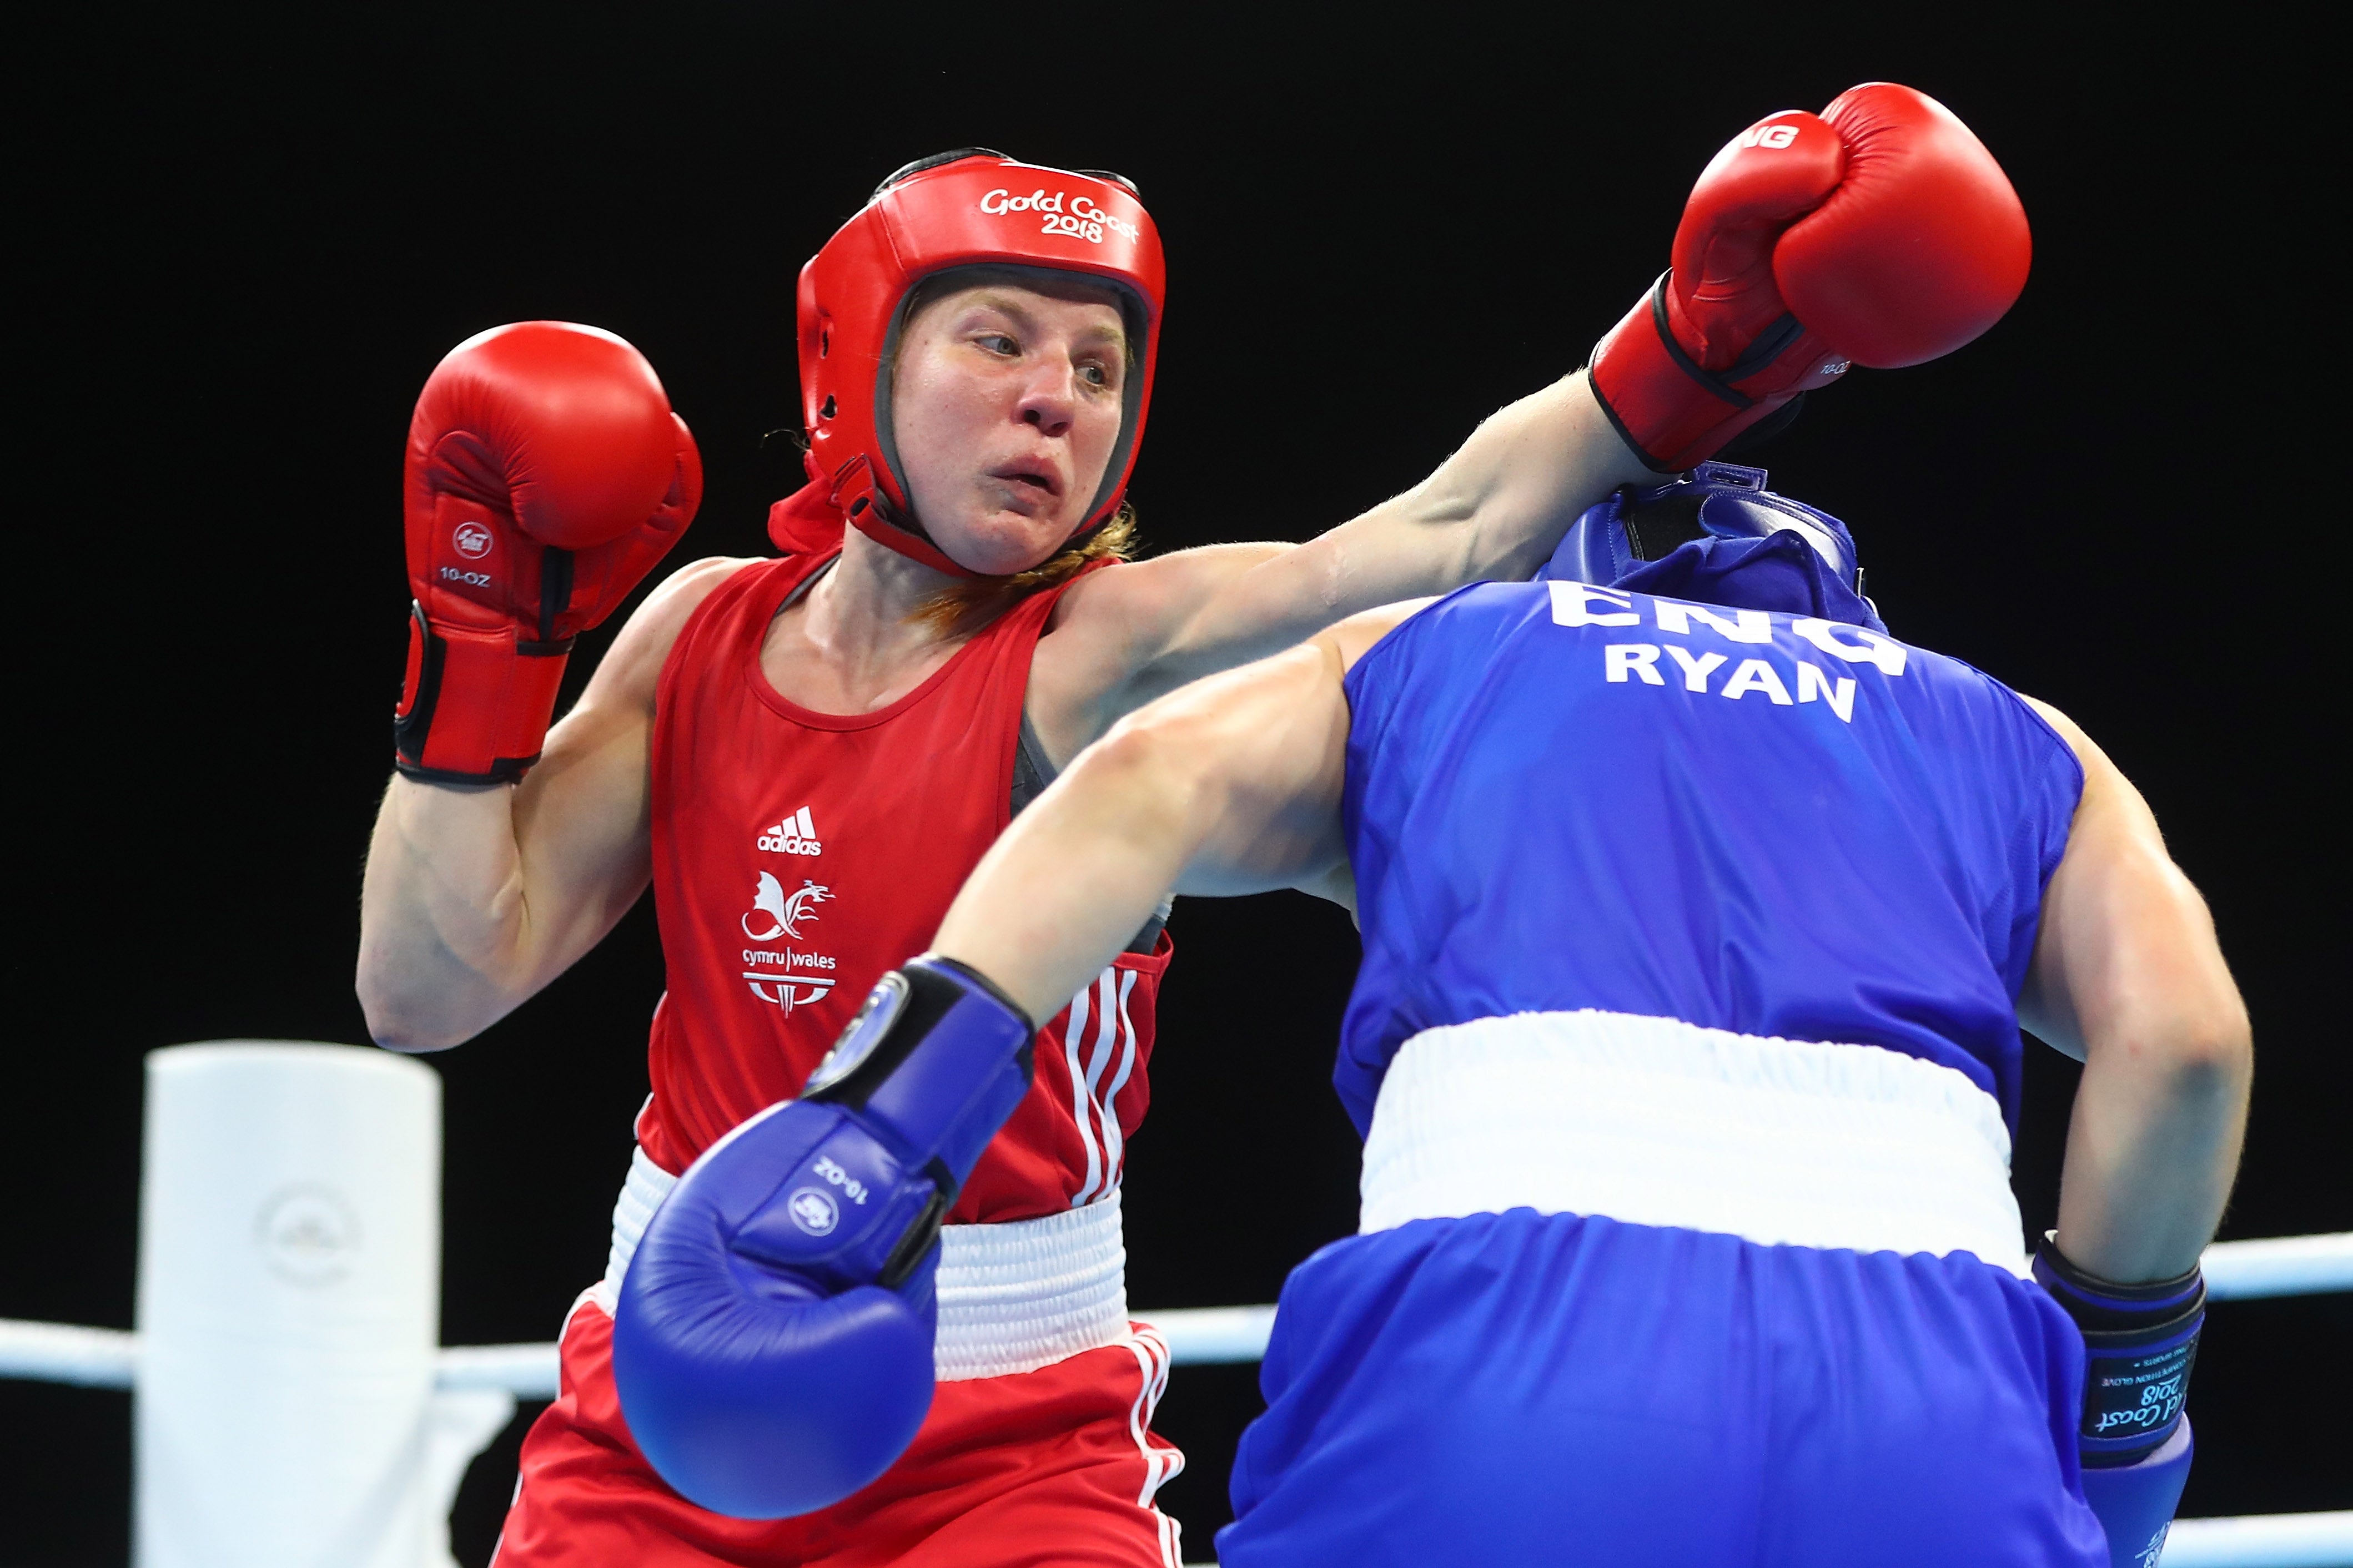 Commonwealth Games 2022 No friendly games as Britains best fight for their futures in Birmingham The Independent